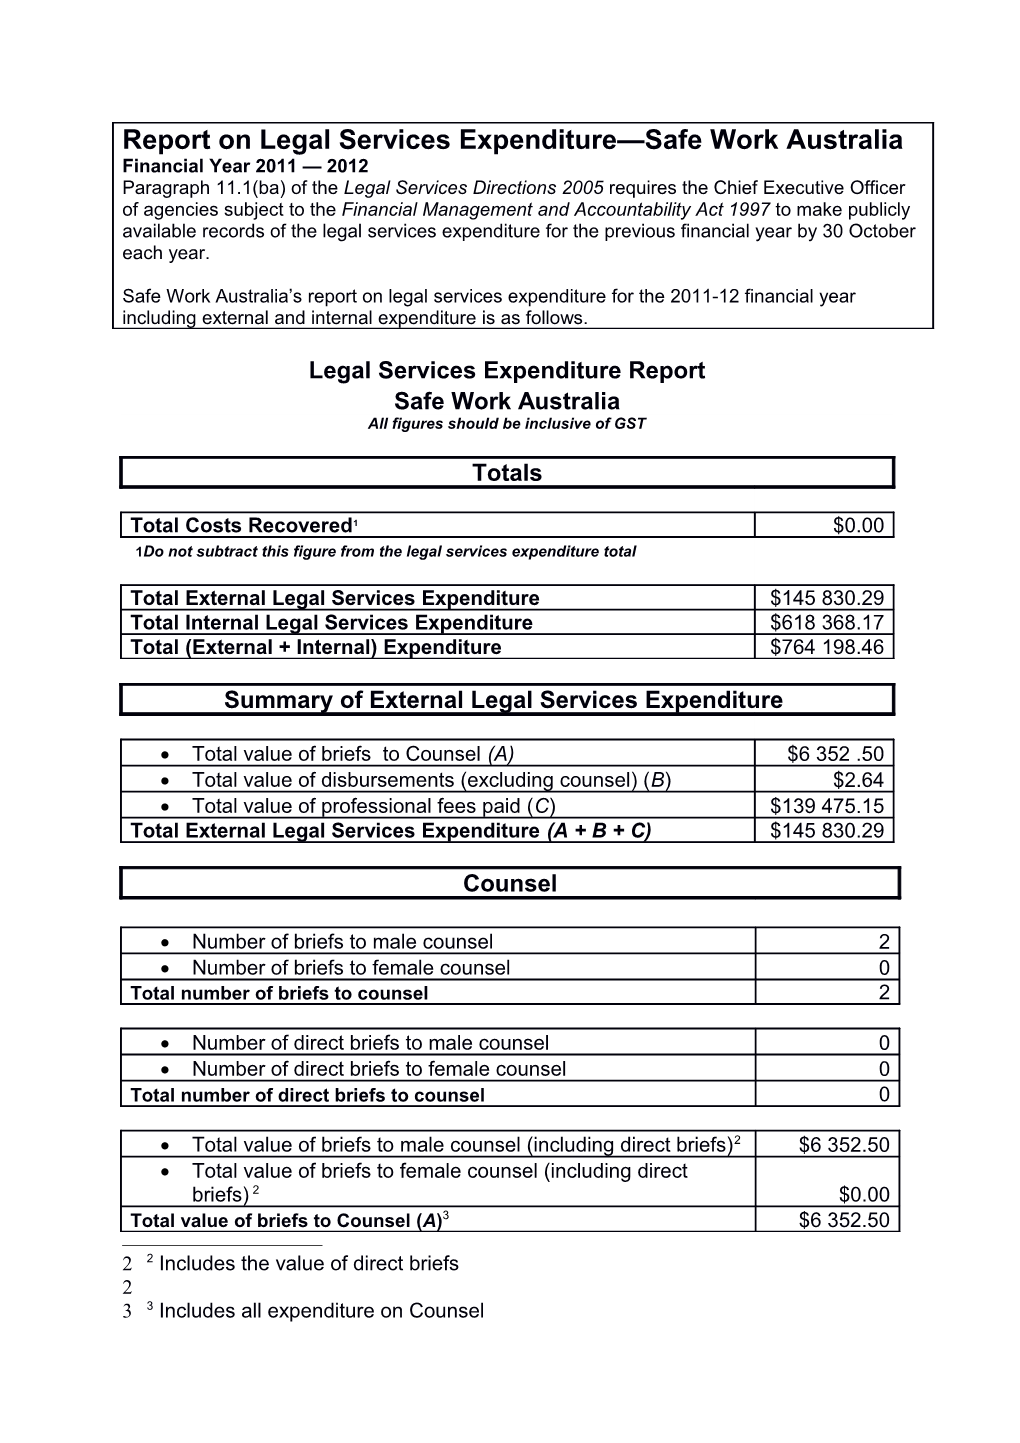 Legal Services Expenditure Budget 2011-12